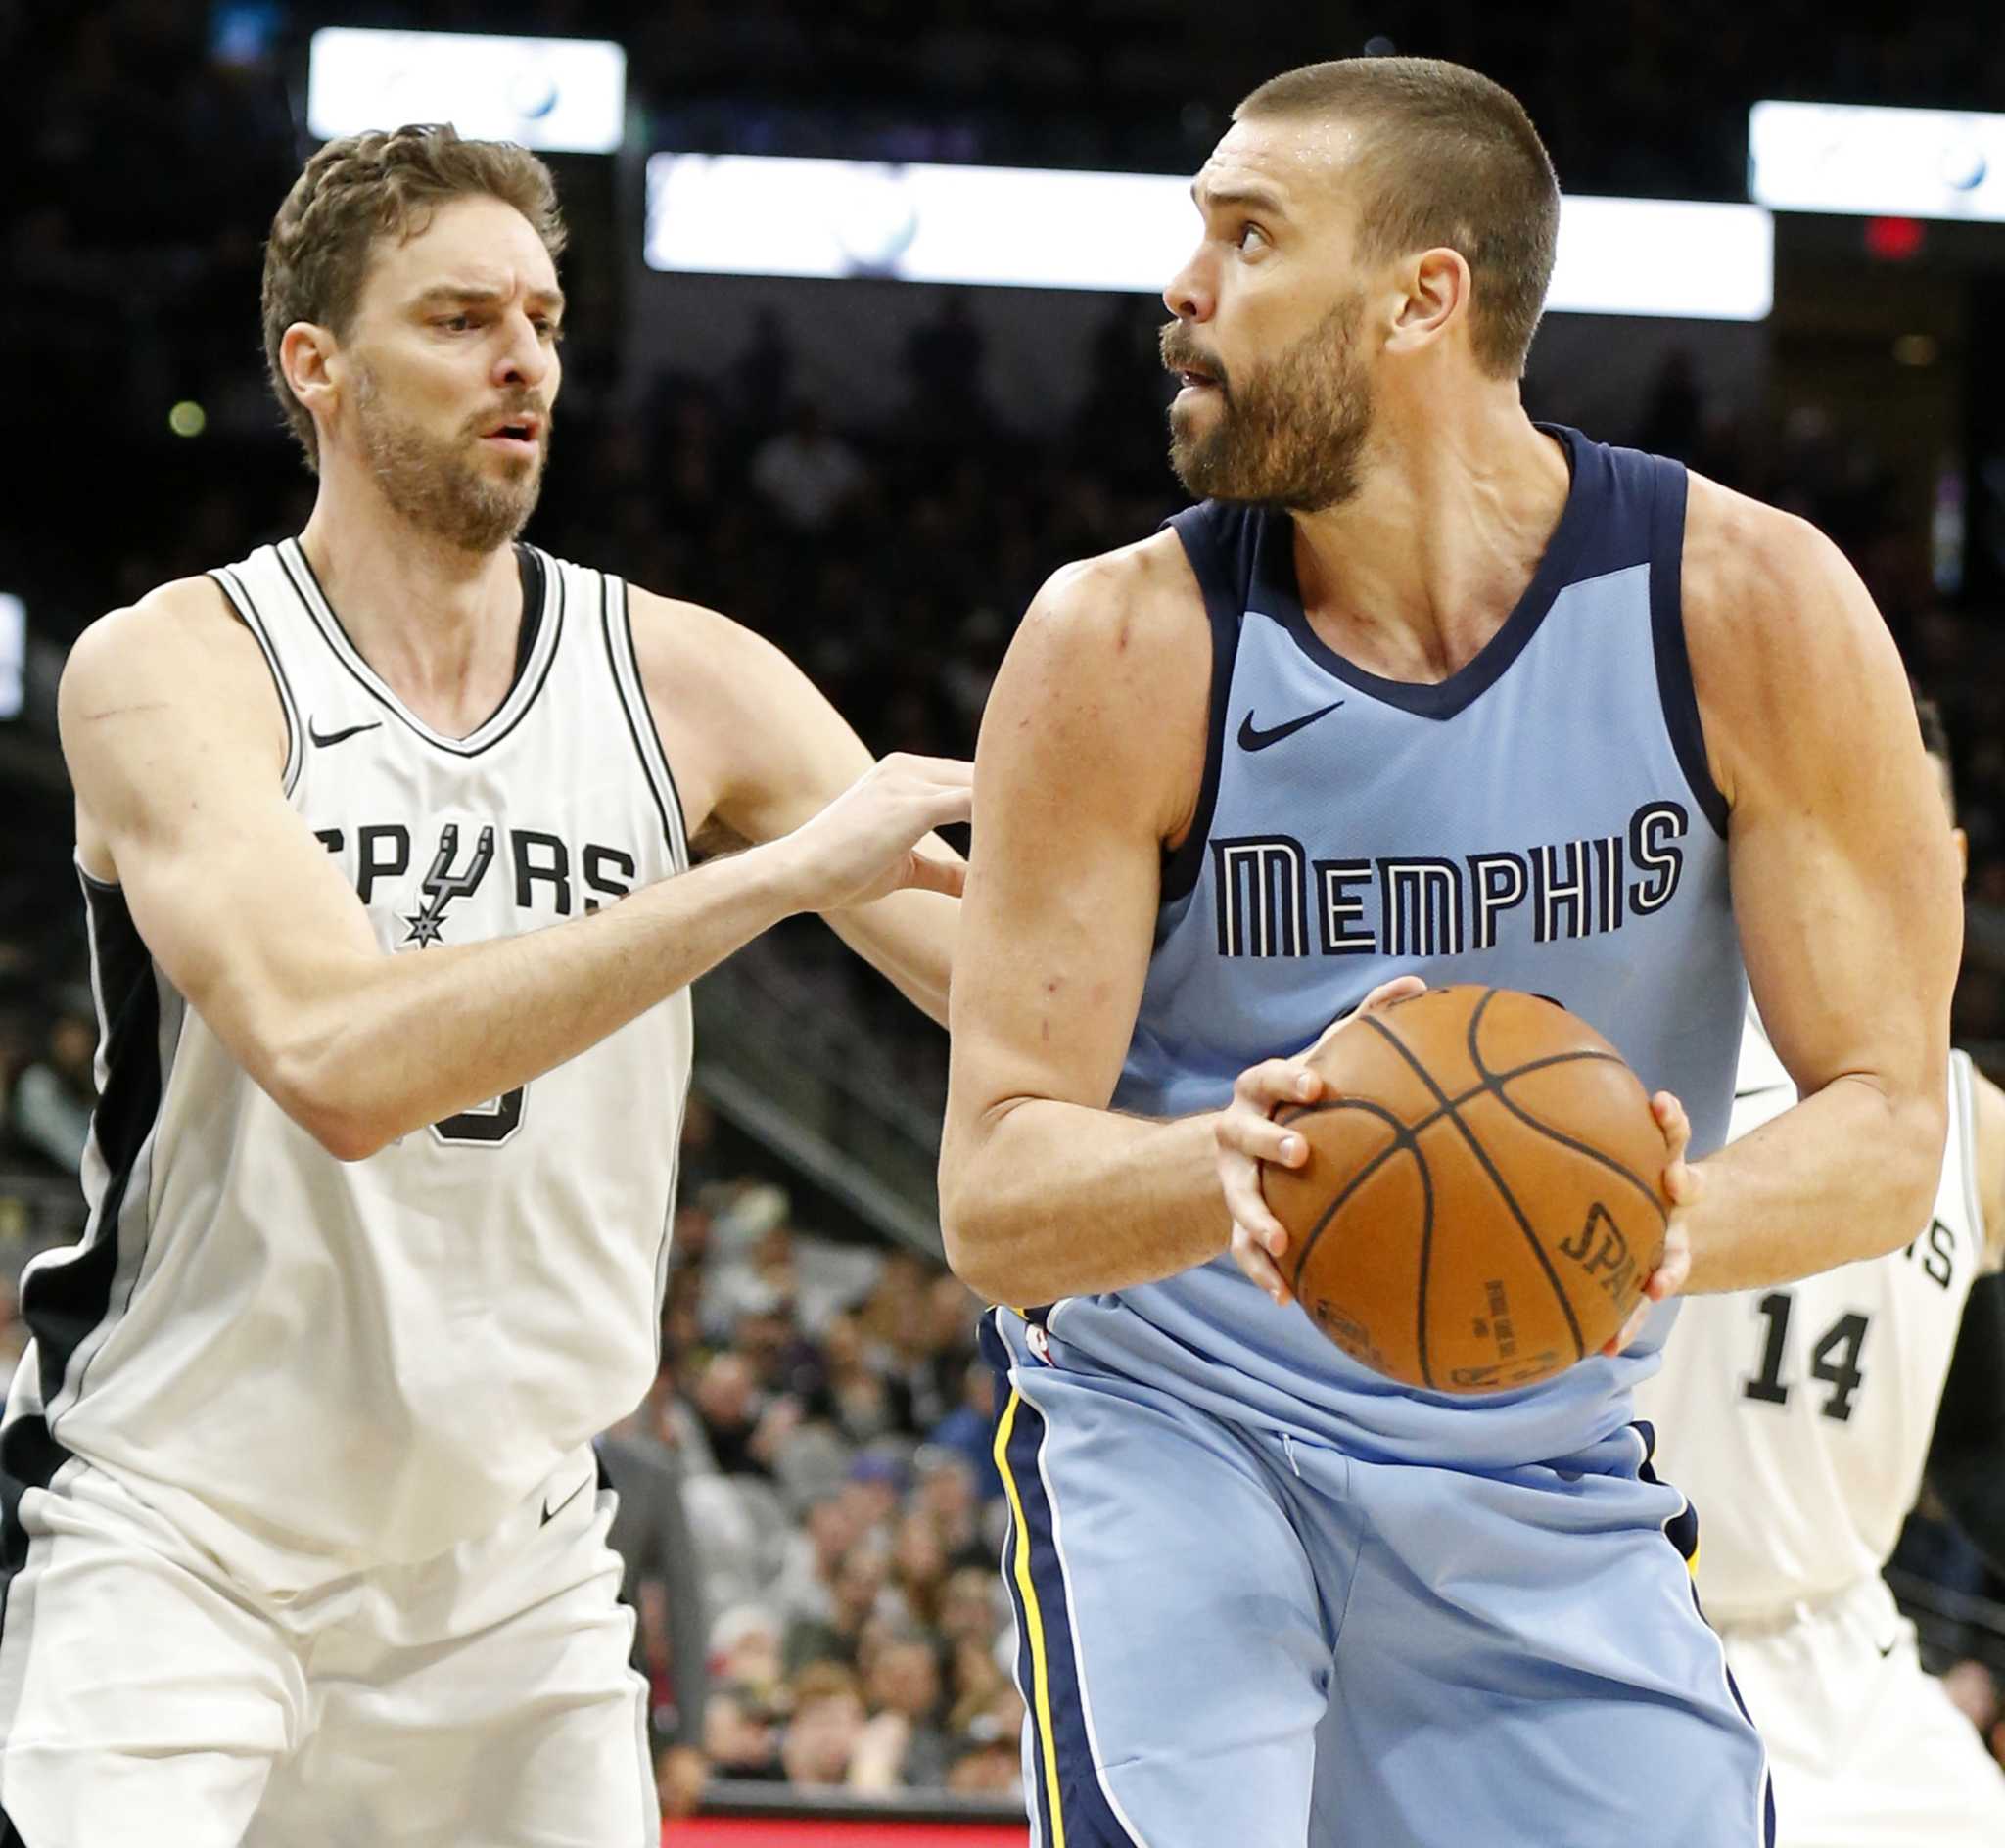 Pau Gasol of San Antonio Spurs suffers shoulder injury after colliding with  brother Marc Gasol of Memphis Grizzlies - ESPN